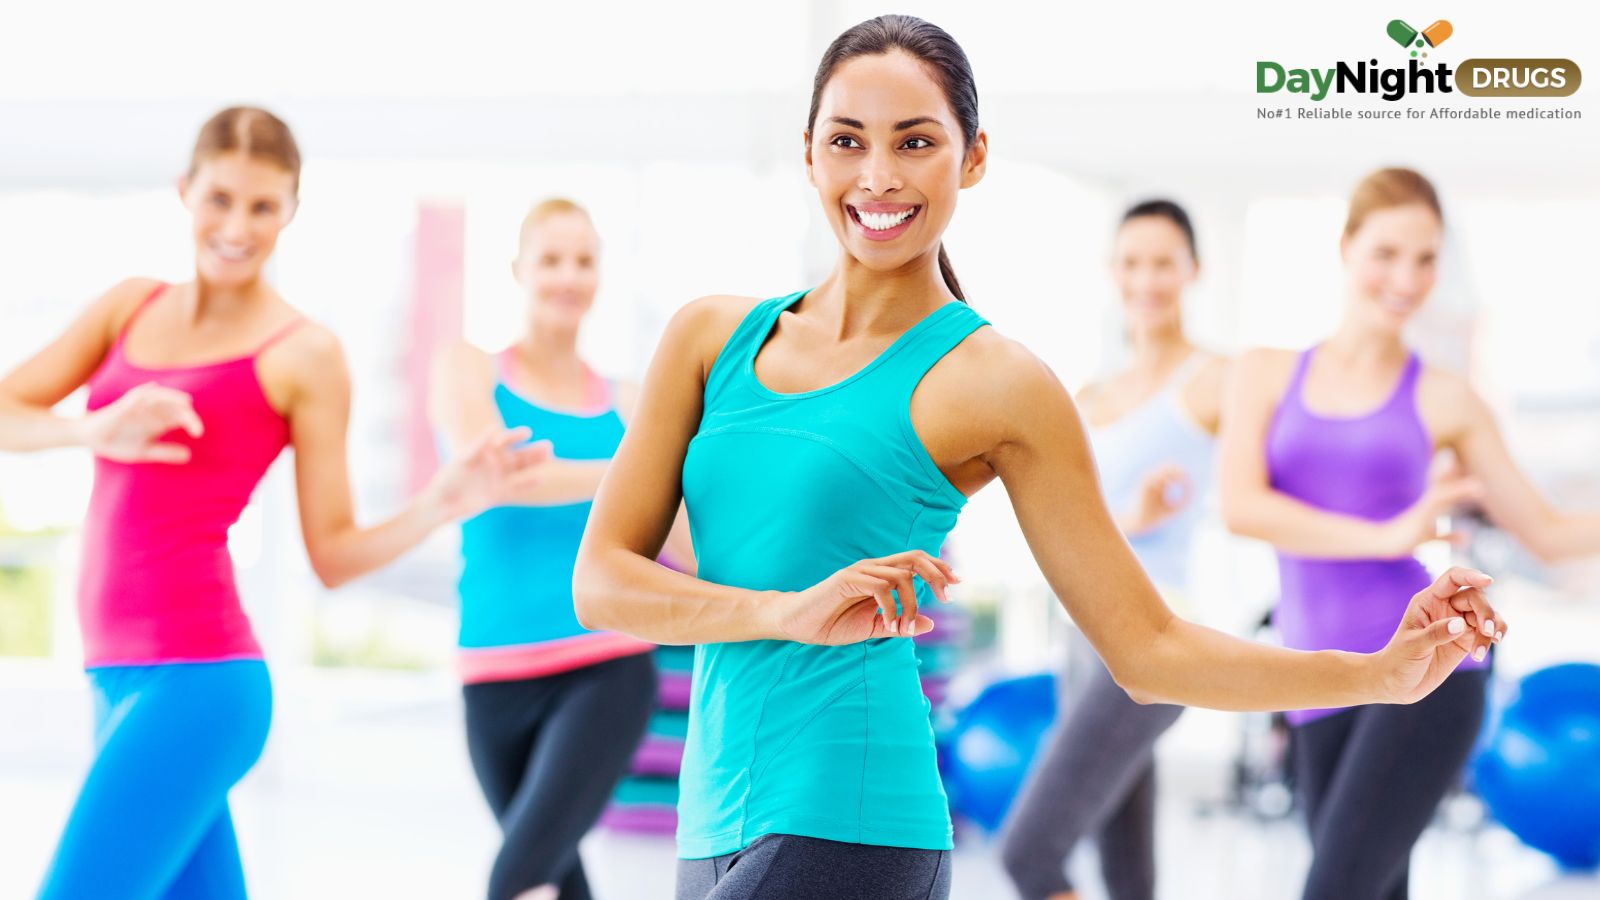 aerobic exercise improves your overall well-being.